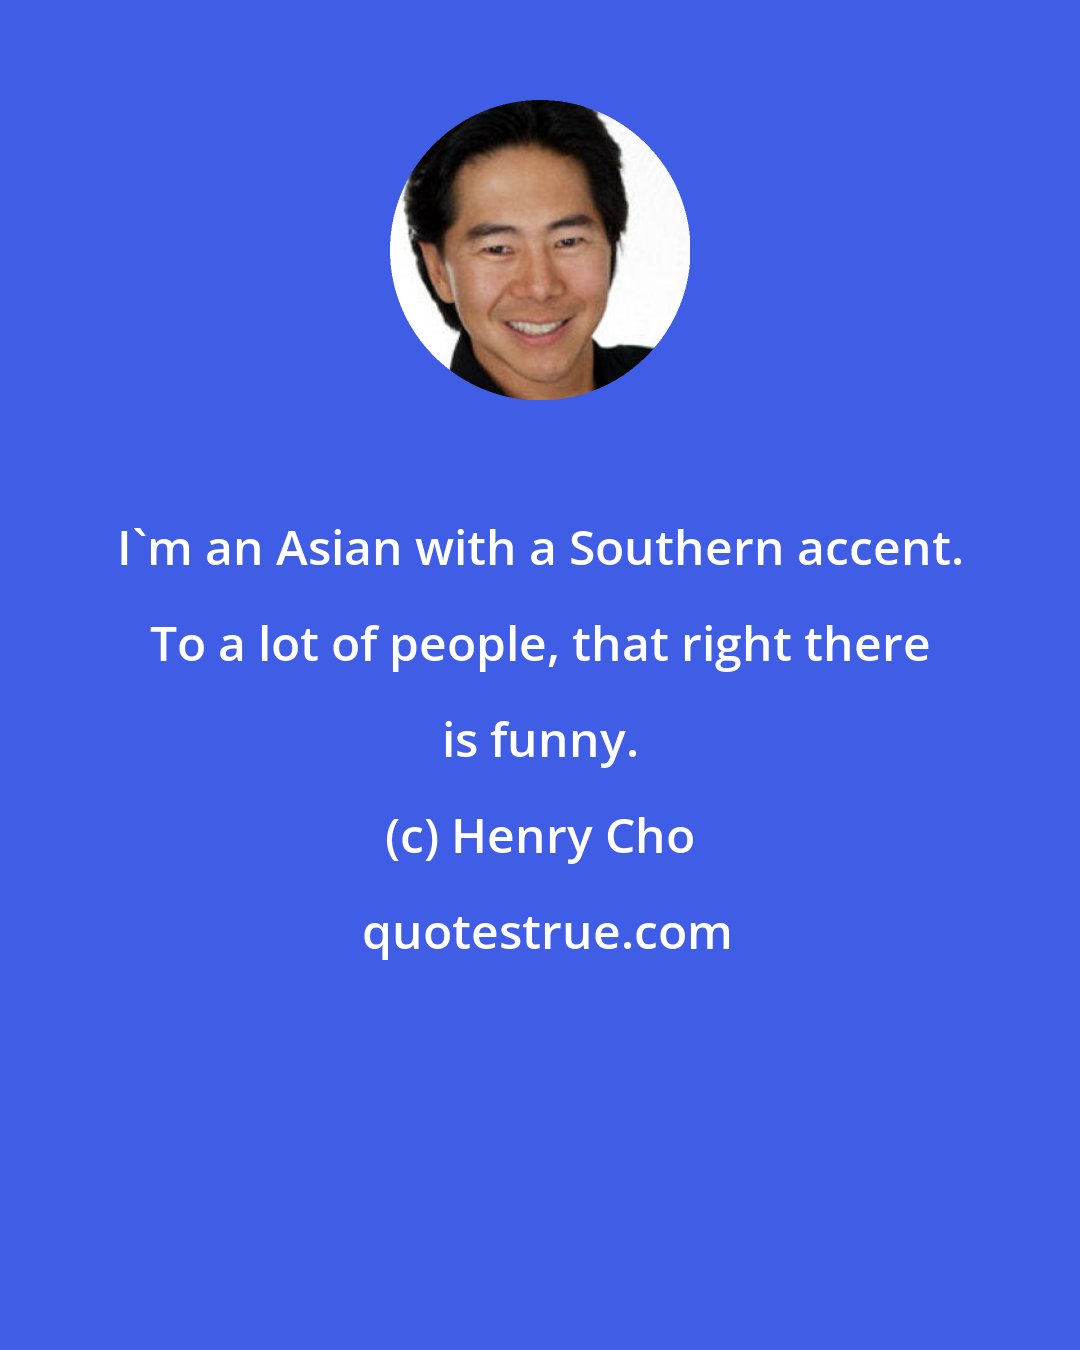 Henry Cho: I'm an Asian with a Southern accent. To a lot of people, that right there is funny.